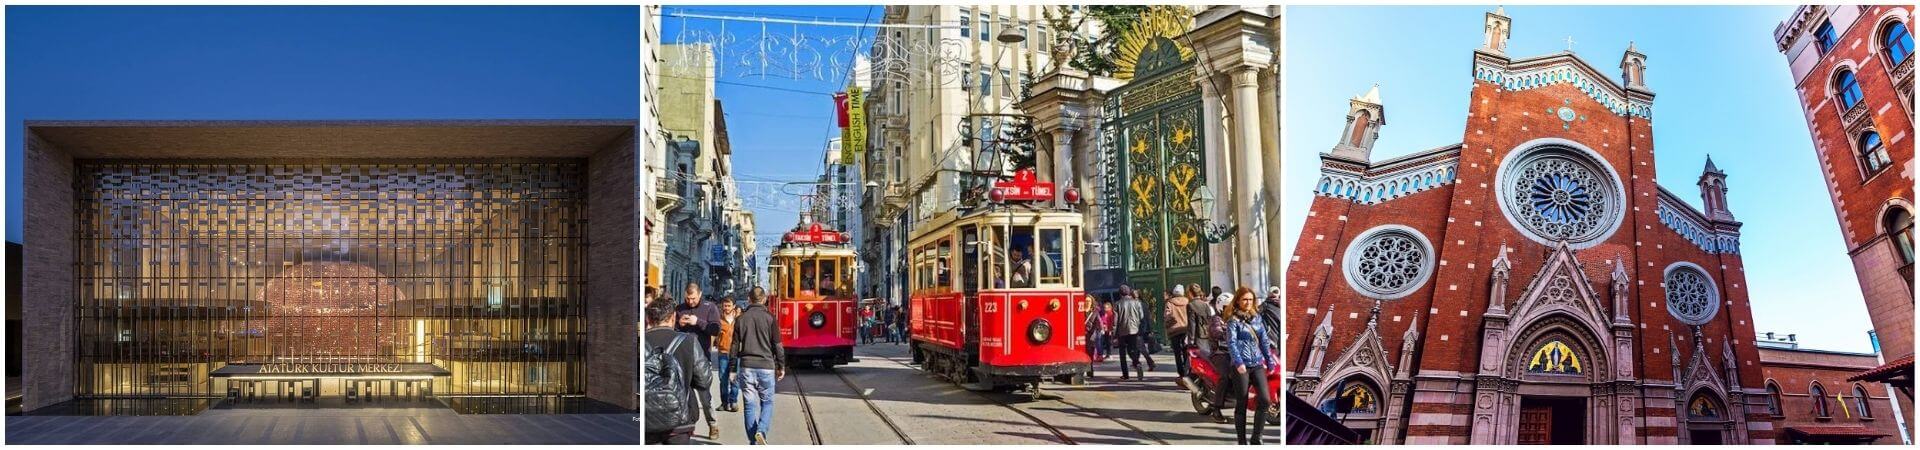 Istiklal Street and Taksim Square Guided Tour